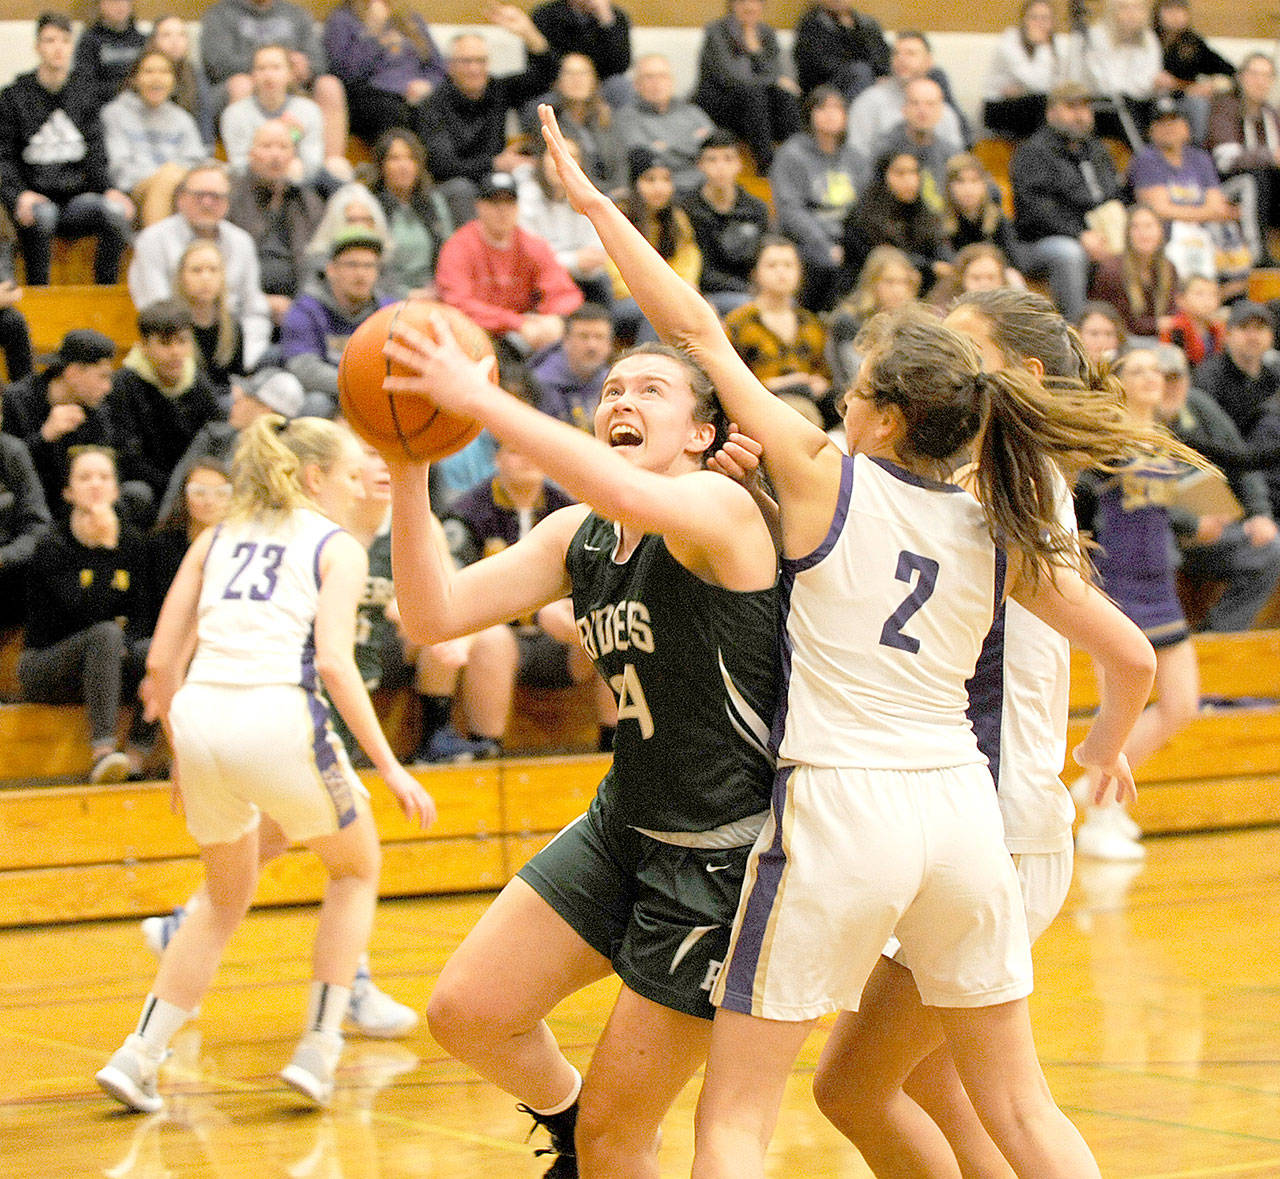 Port Angeles’ Jaida Wood goes up for a shot against Sequim’s Jessica Dietzman in Sequim on Saturday. (Michael Dashiell/Olympic Peninsula News Group)